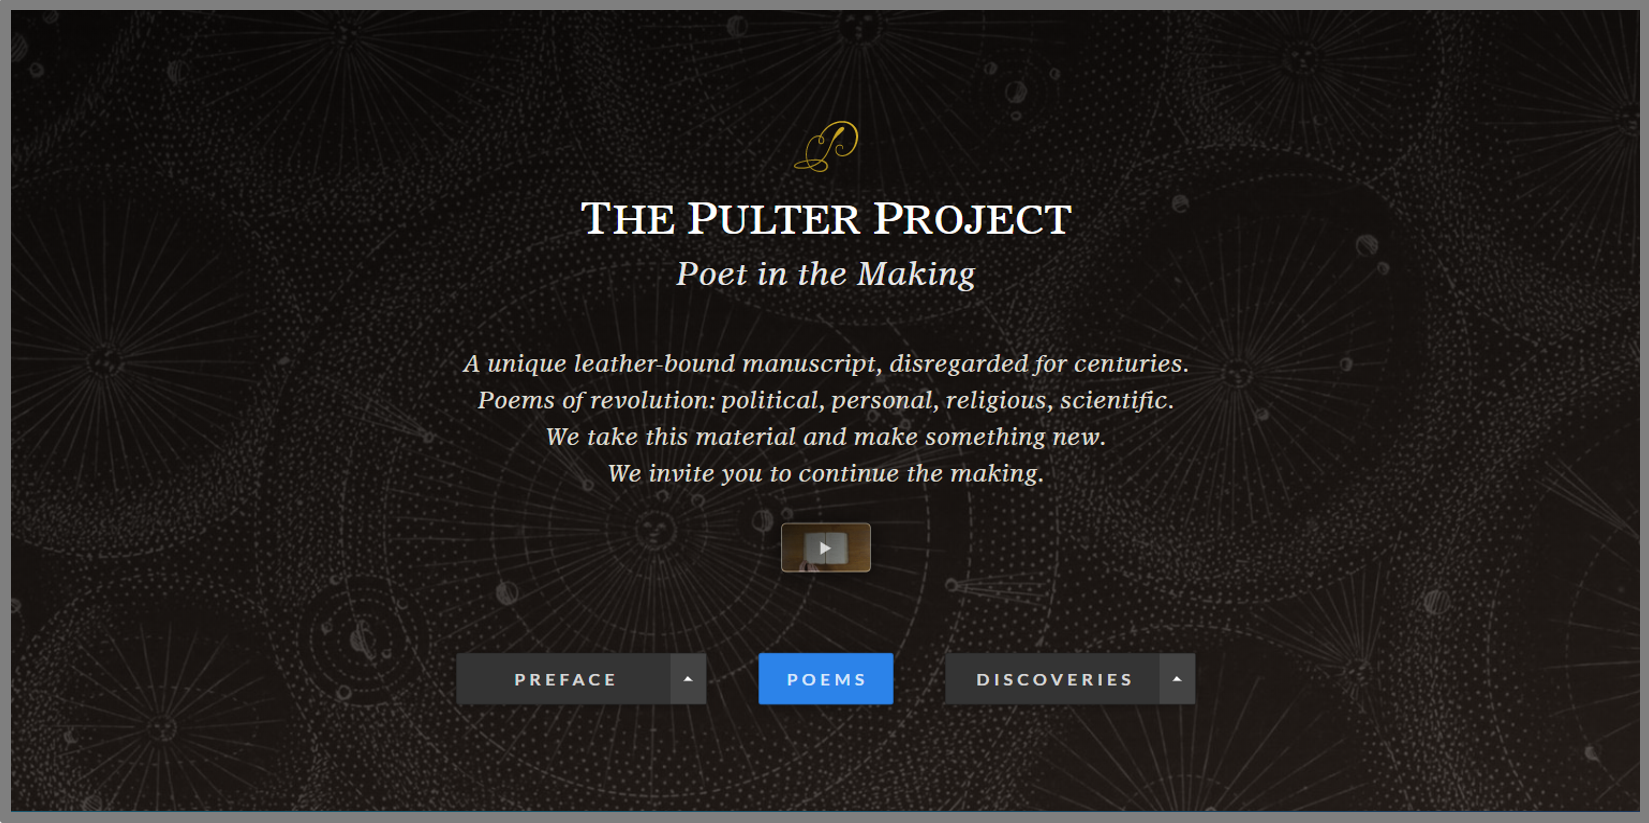 The Pulter Project 웹사이트 가기